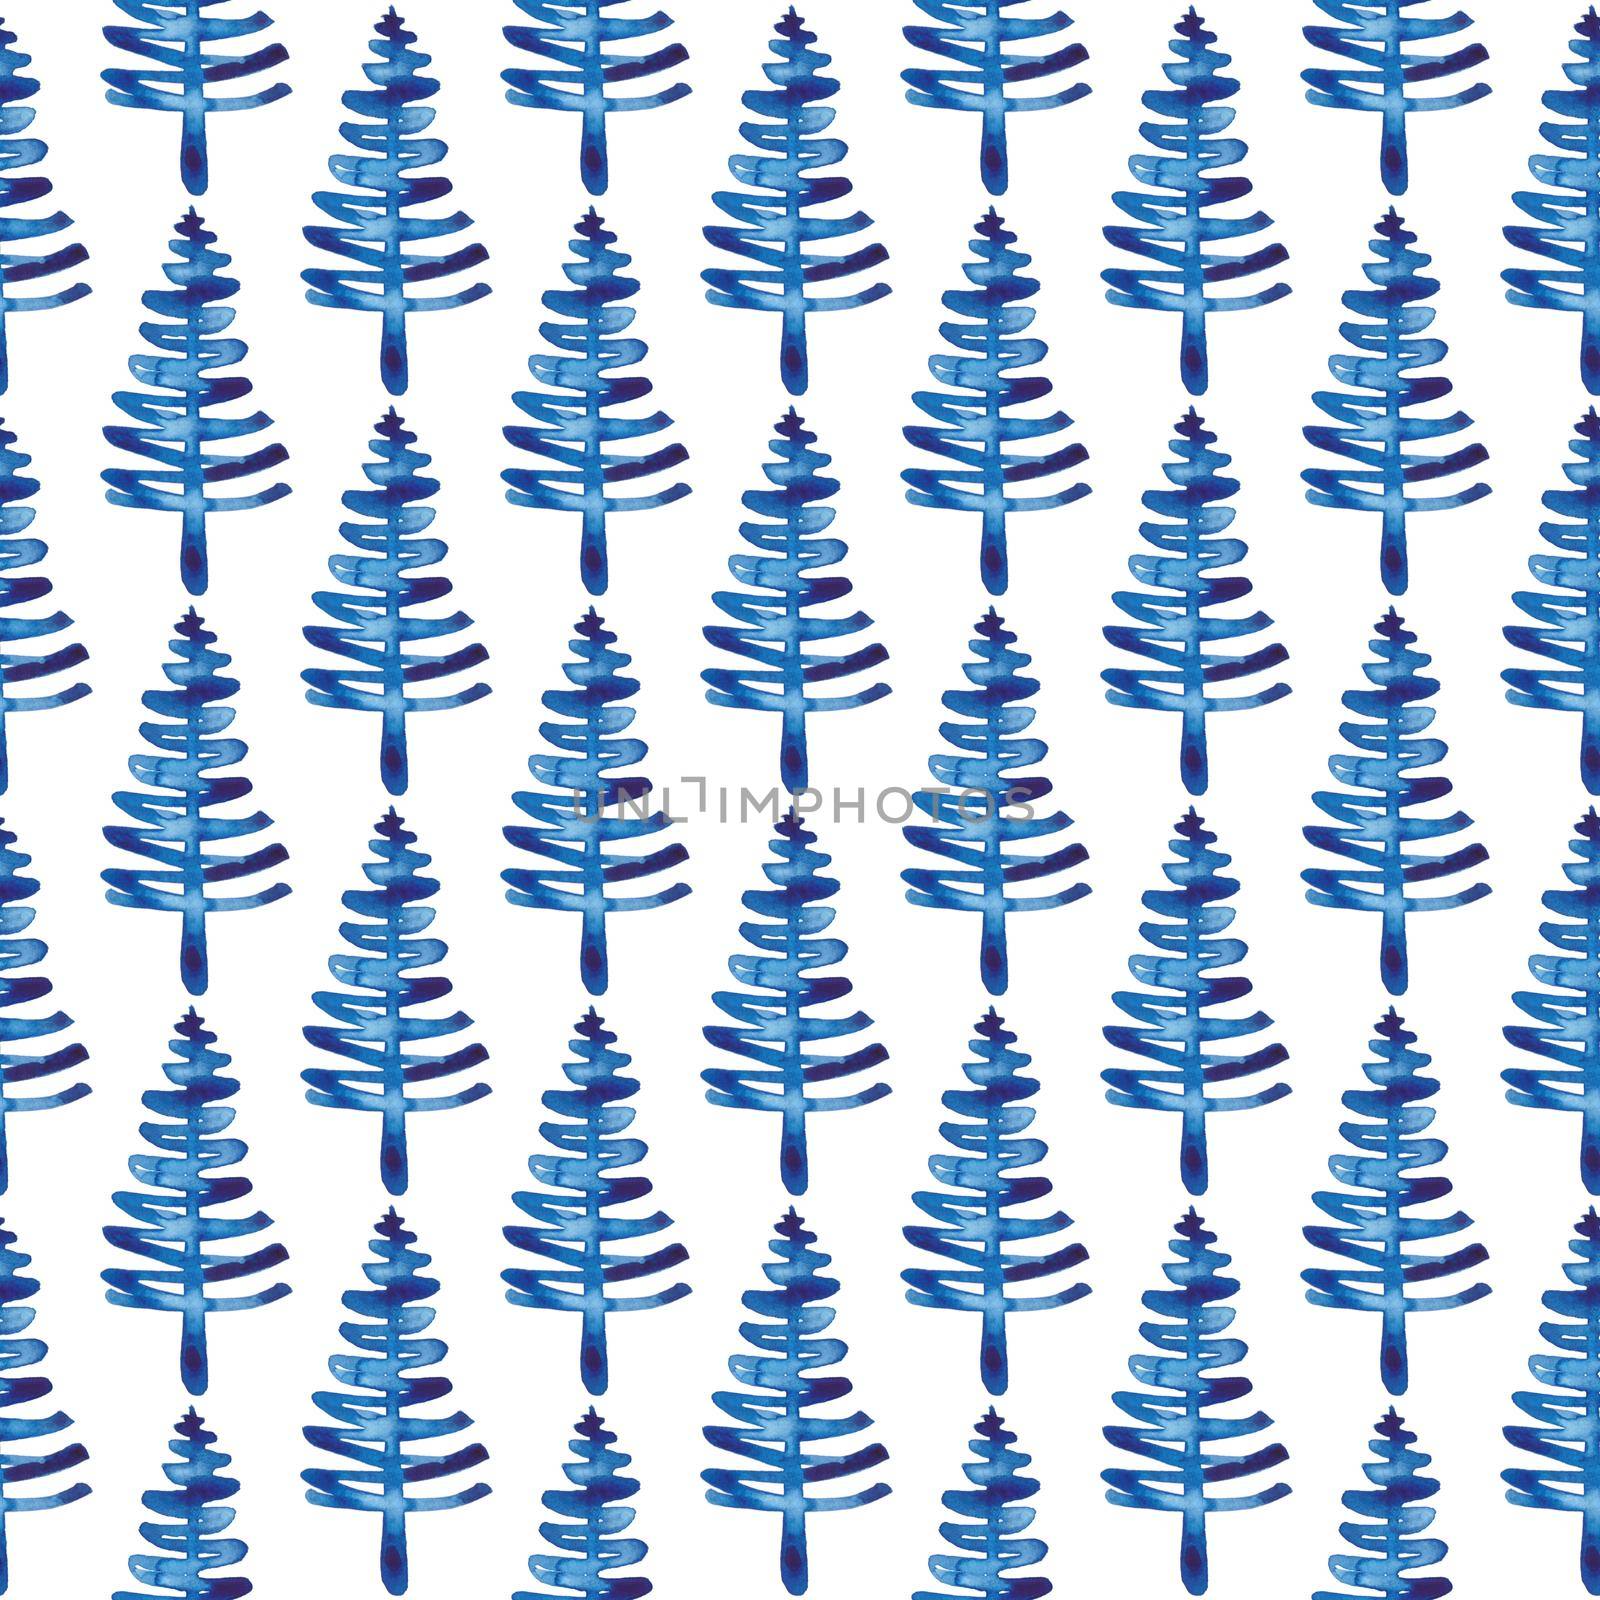 XMAS watercolor Fir Tree Seamless Pattern in Blue Color. Hand Painted Spruce Pine tree background or wallpaper for Ornament, Wrapping or Christmas Decoration by DesignAB